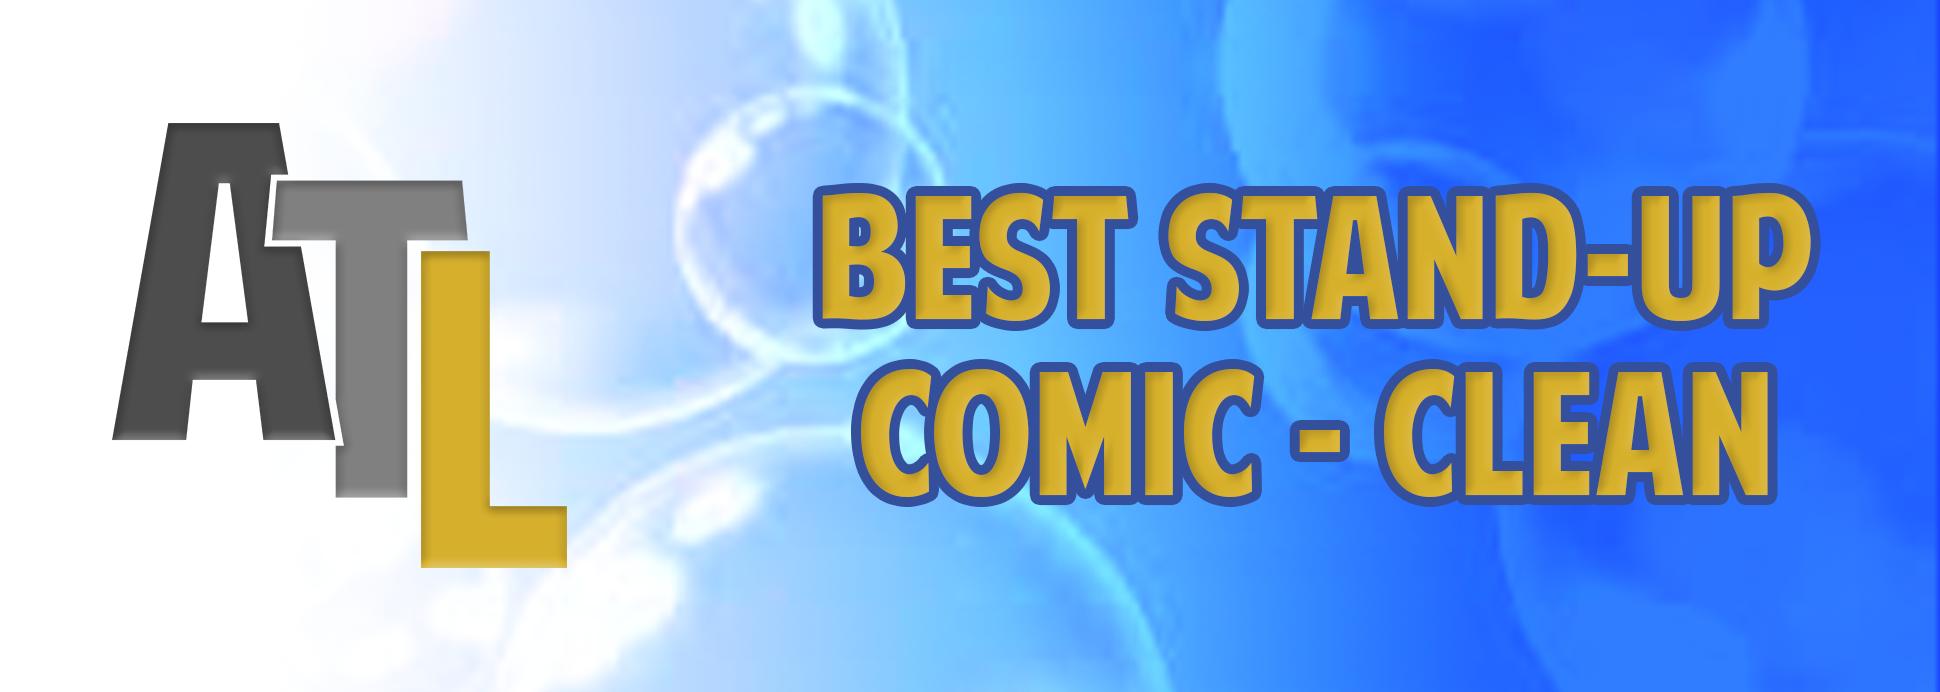 Best Stand-Up Comic (Clean)